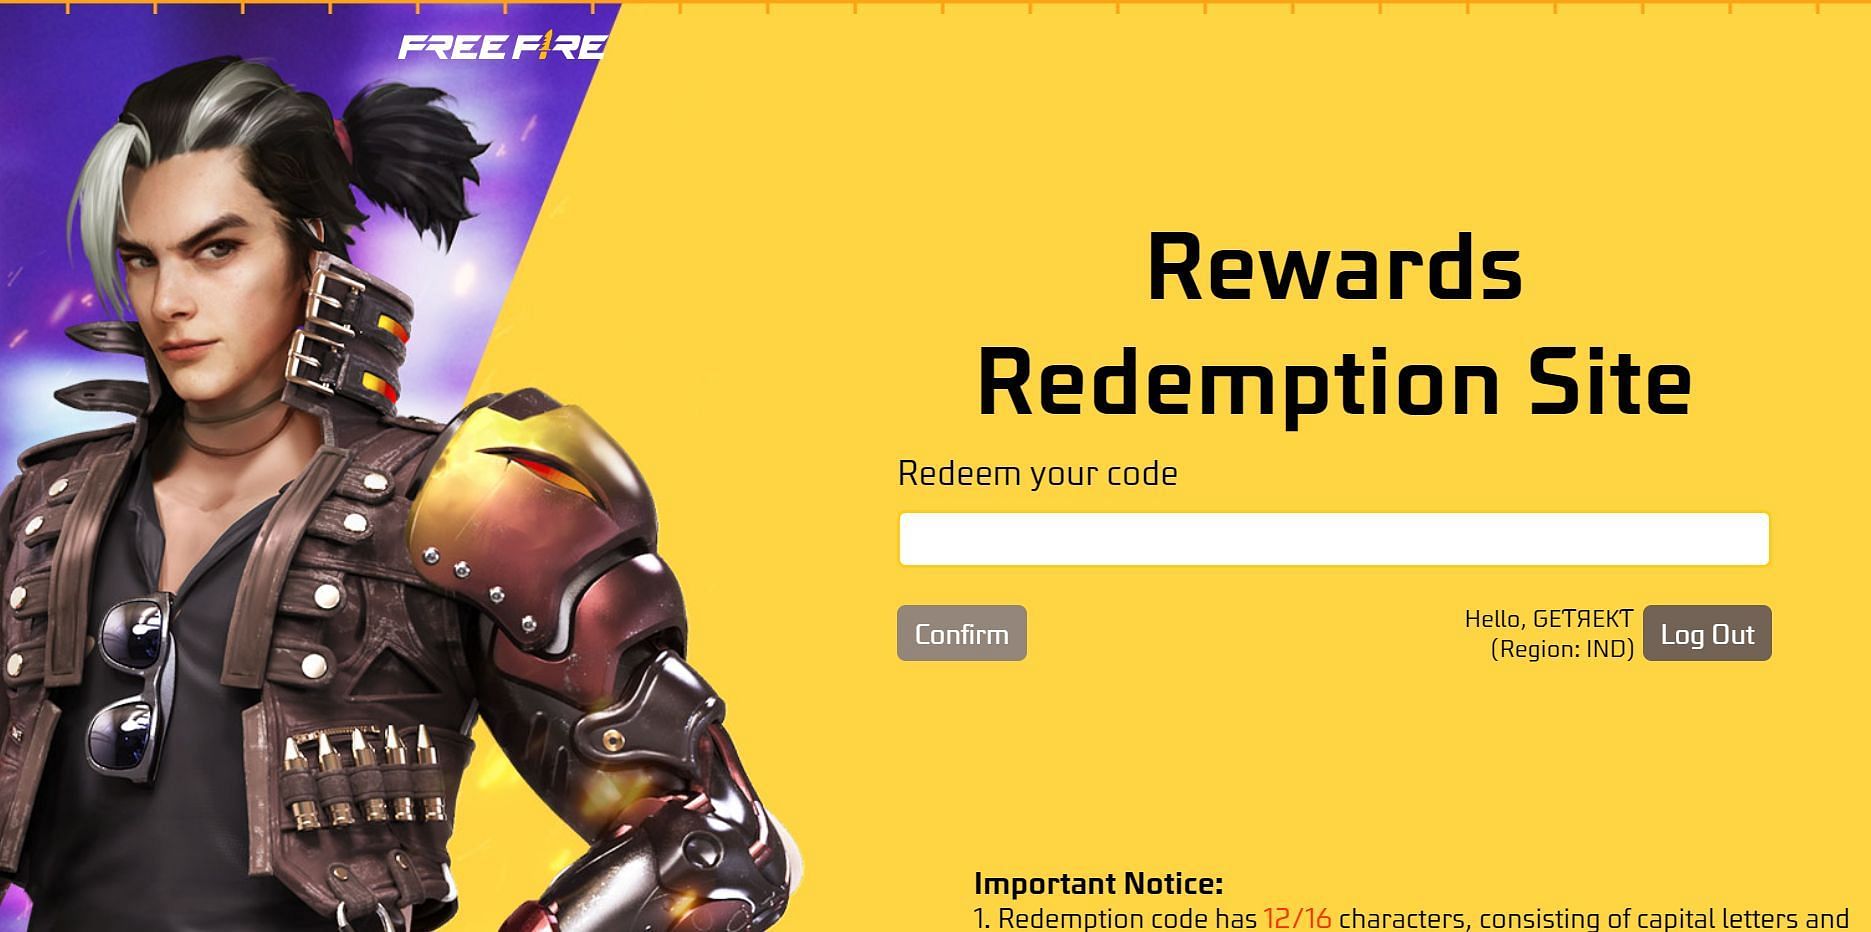 Enter the redemption code in the text field (Image via Garena)